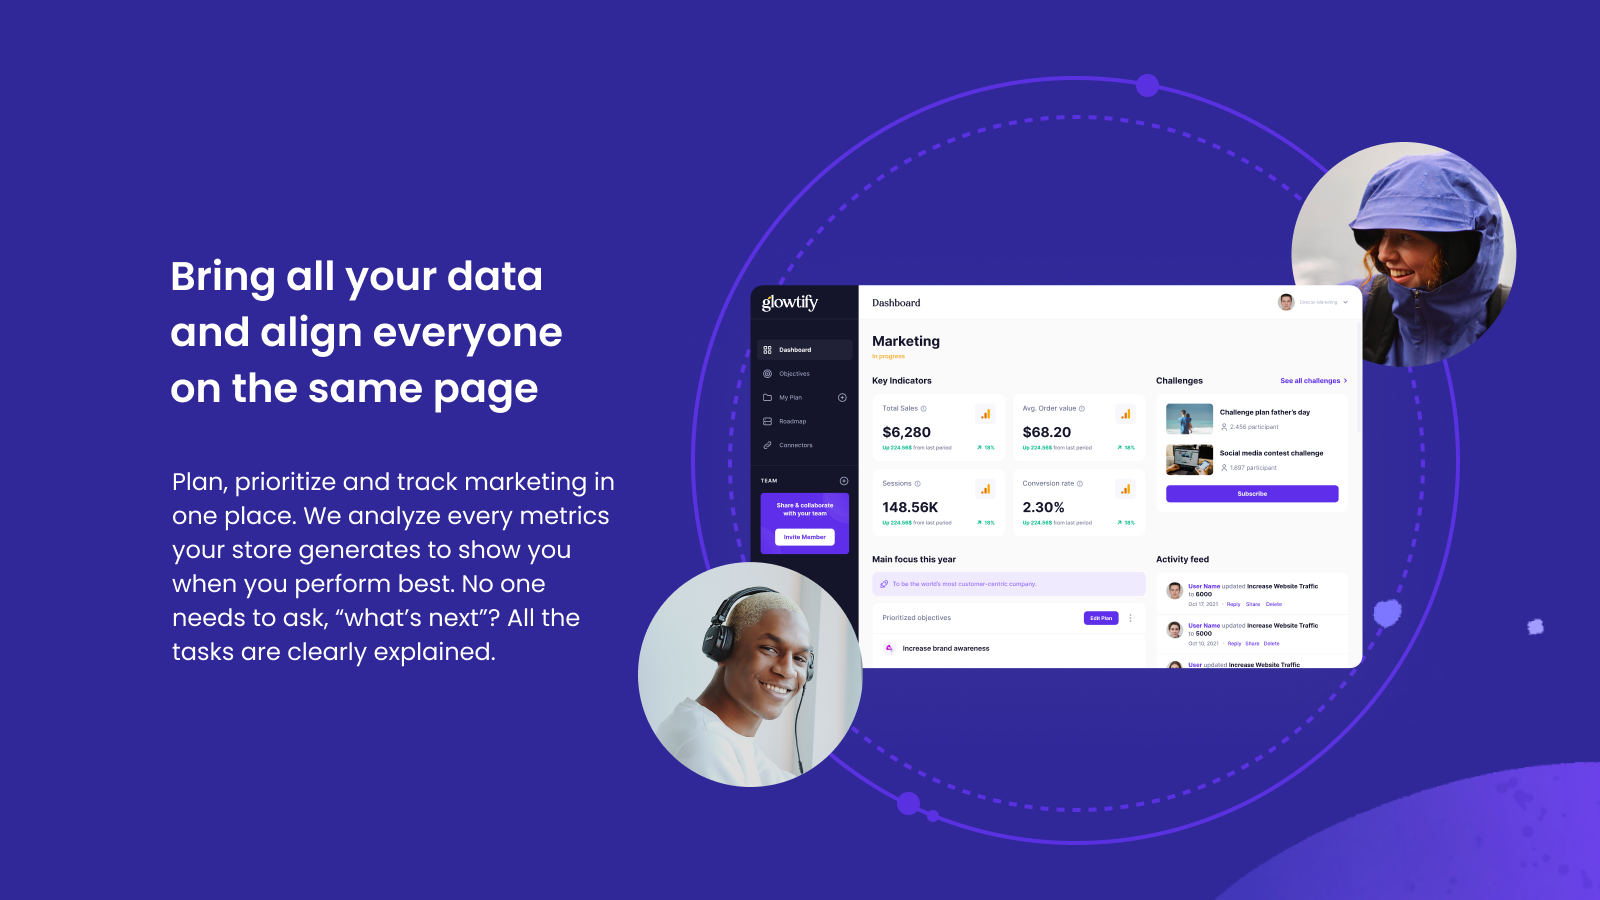 Bring all your data and align everyone on the same page